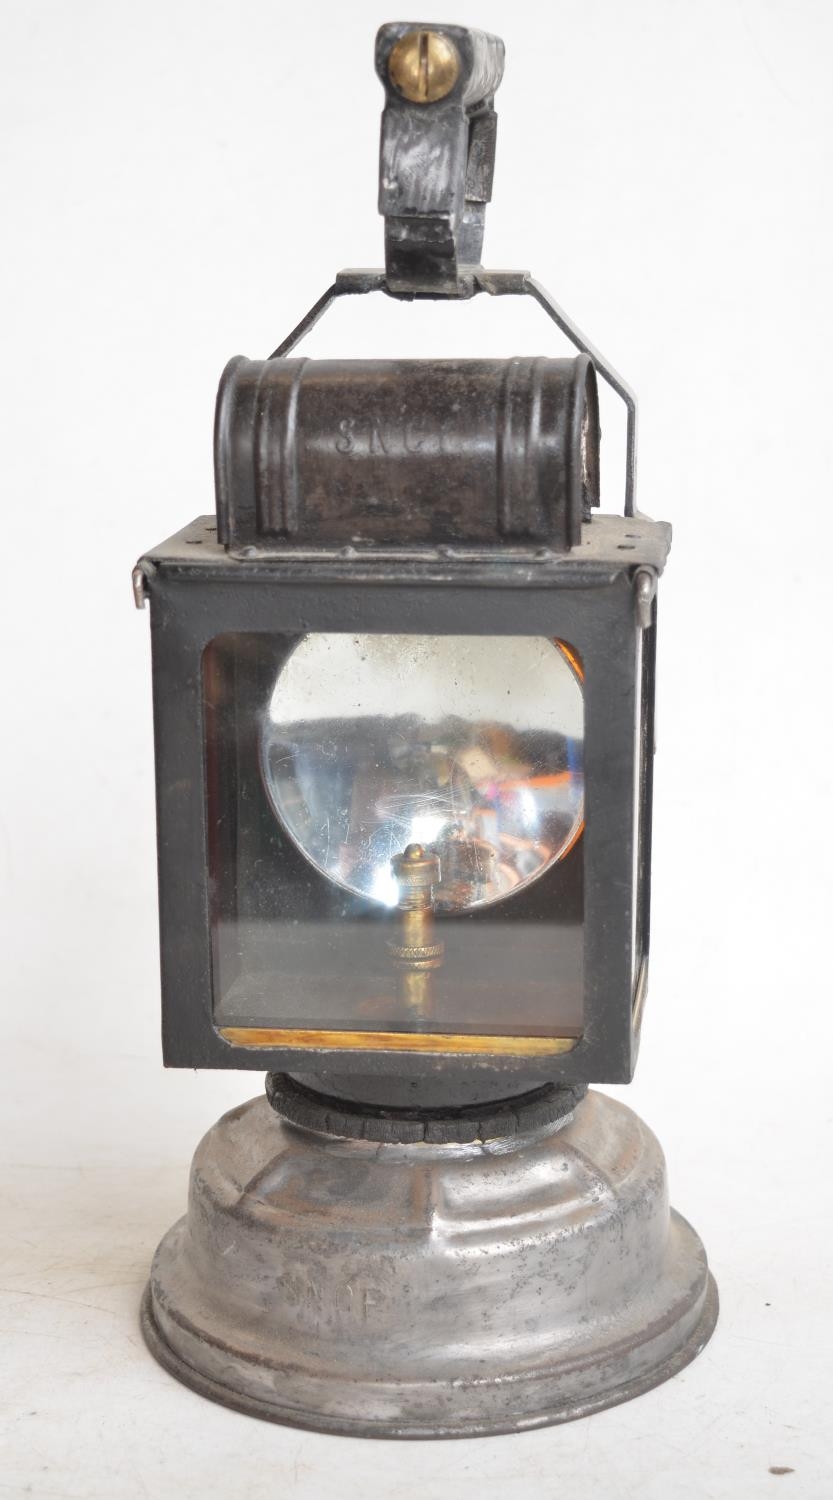 Albert Butine SNCF French railway carbide lantern, circa 1920-30s. Fixed carry handle, stamped top